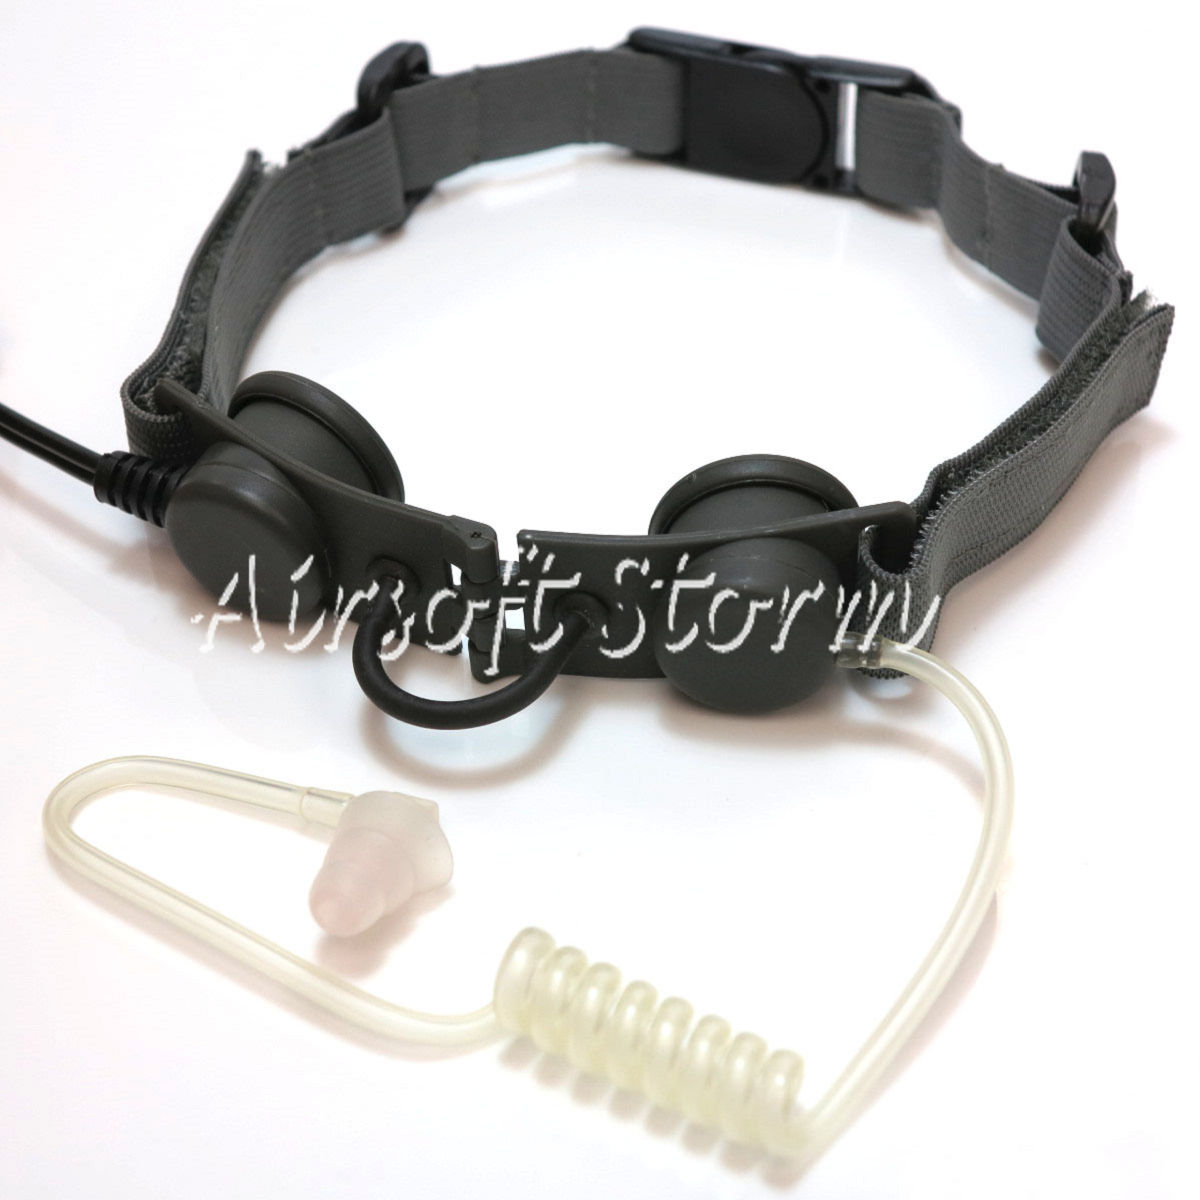 Airsoft Gear SWAT Z Tactical Throat Mic Headset ACU Foliage Green